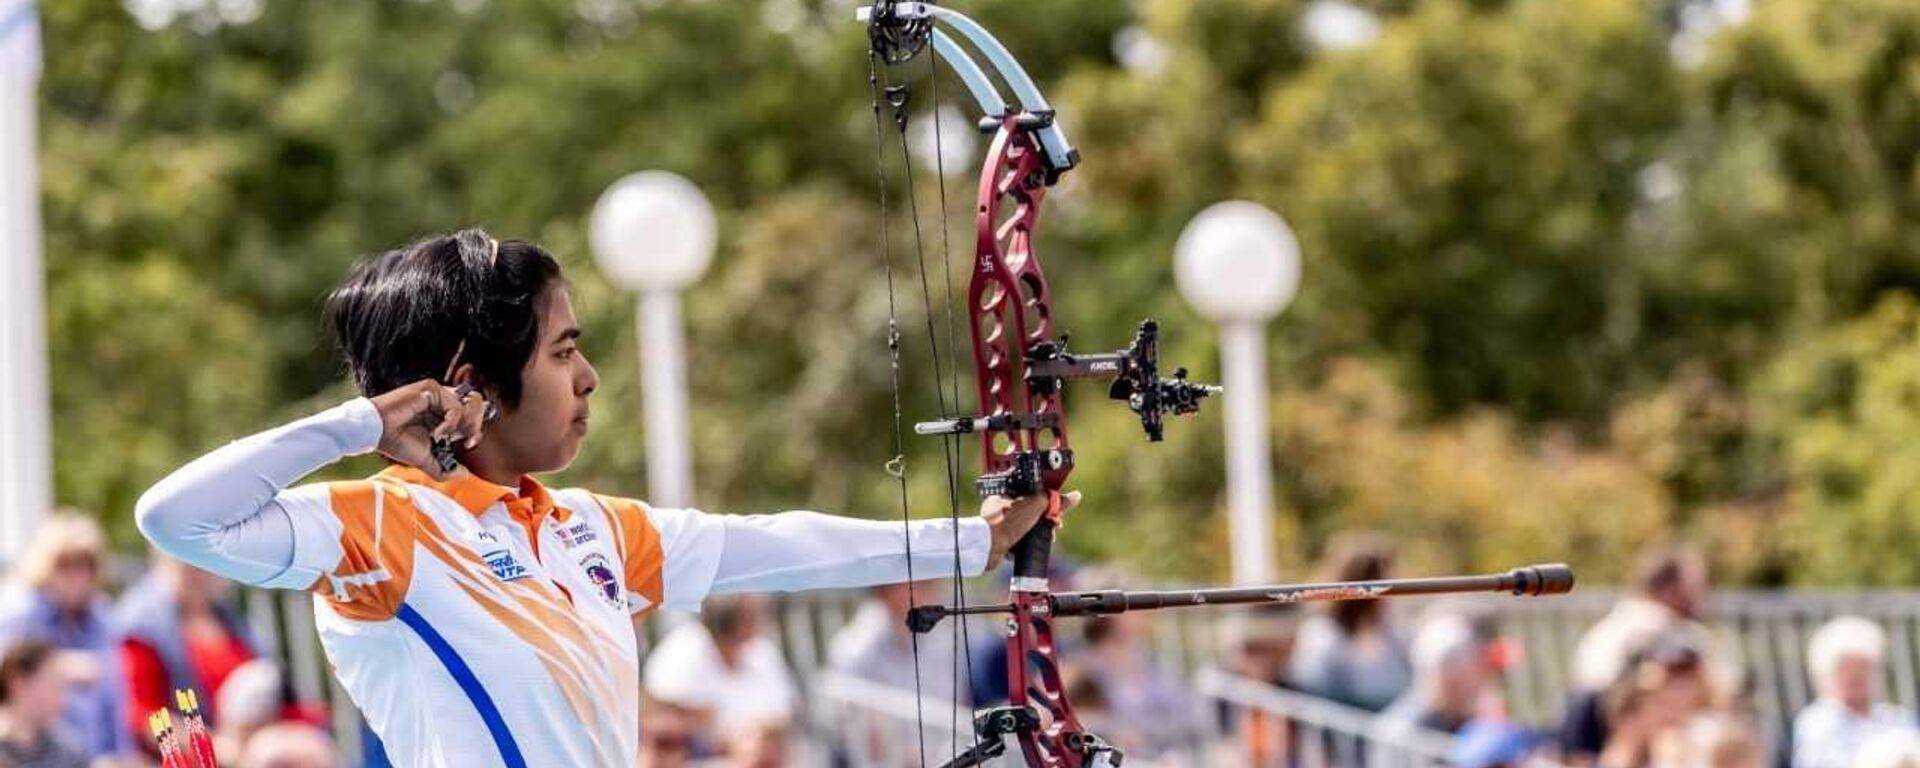 India's Aditi Swami performing in the Archery World Championships in Berlin. - Sputnik India, 1920, 05.09.2023